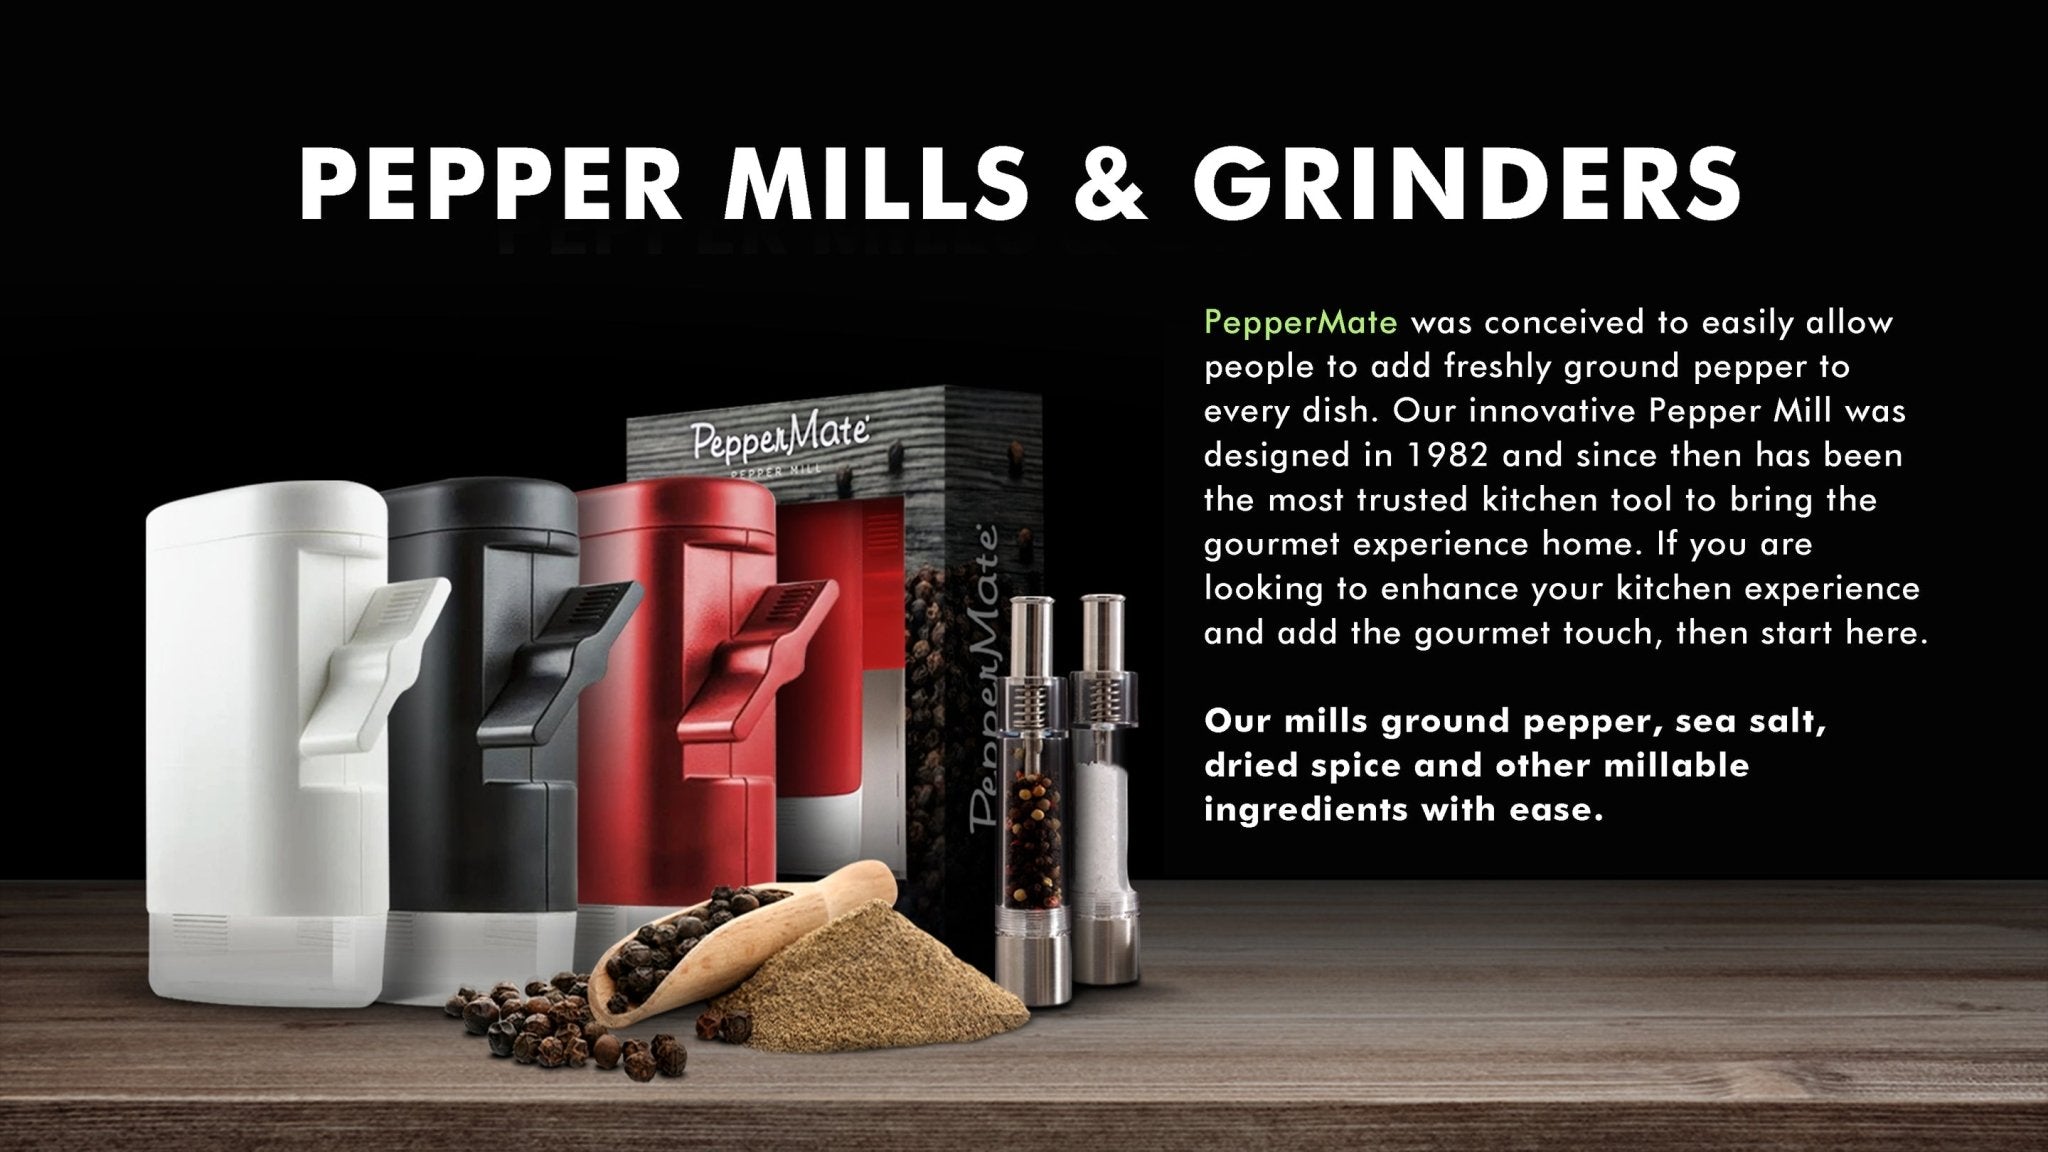 Pepper Mills & Grinders - PepperMate.com | The Home of the World Famous and Best Pepper Mills and Grinders | Fresh Pepper Every Time